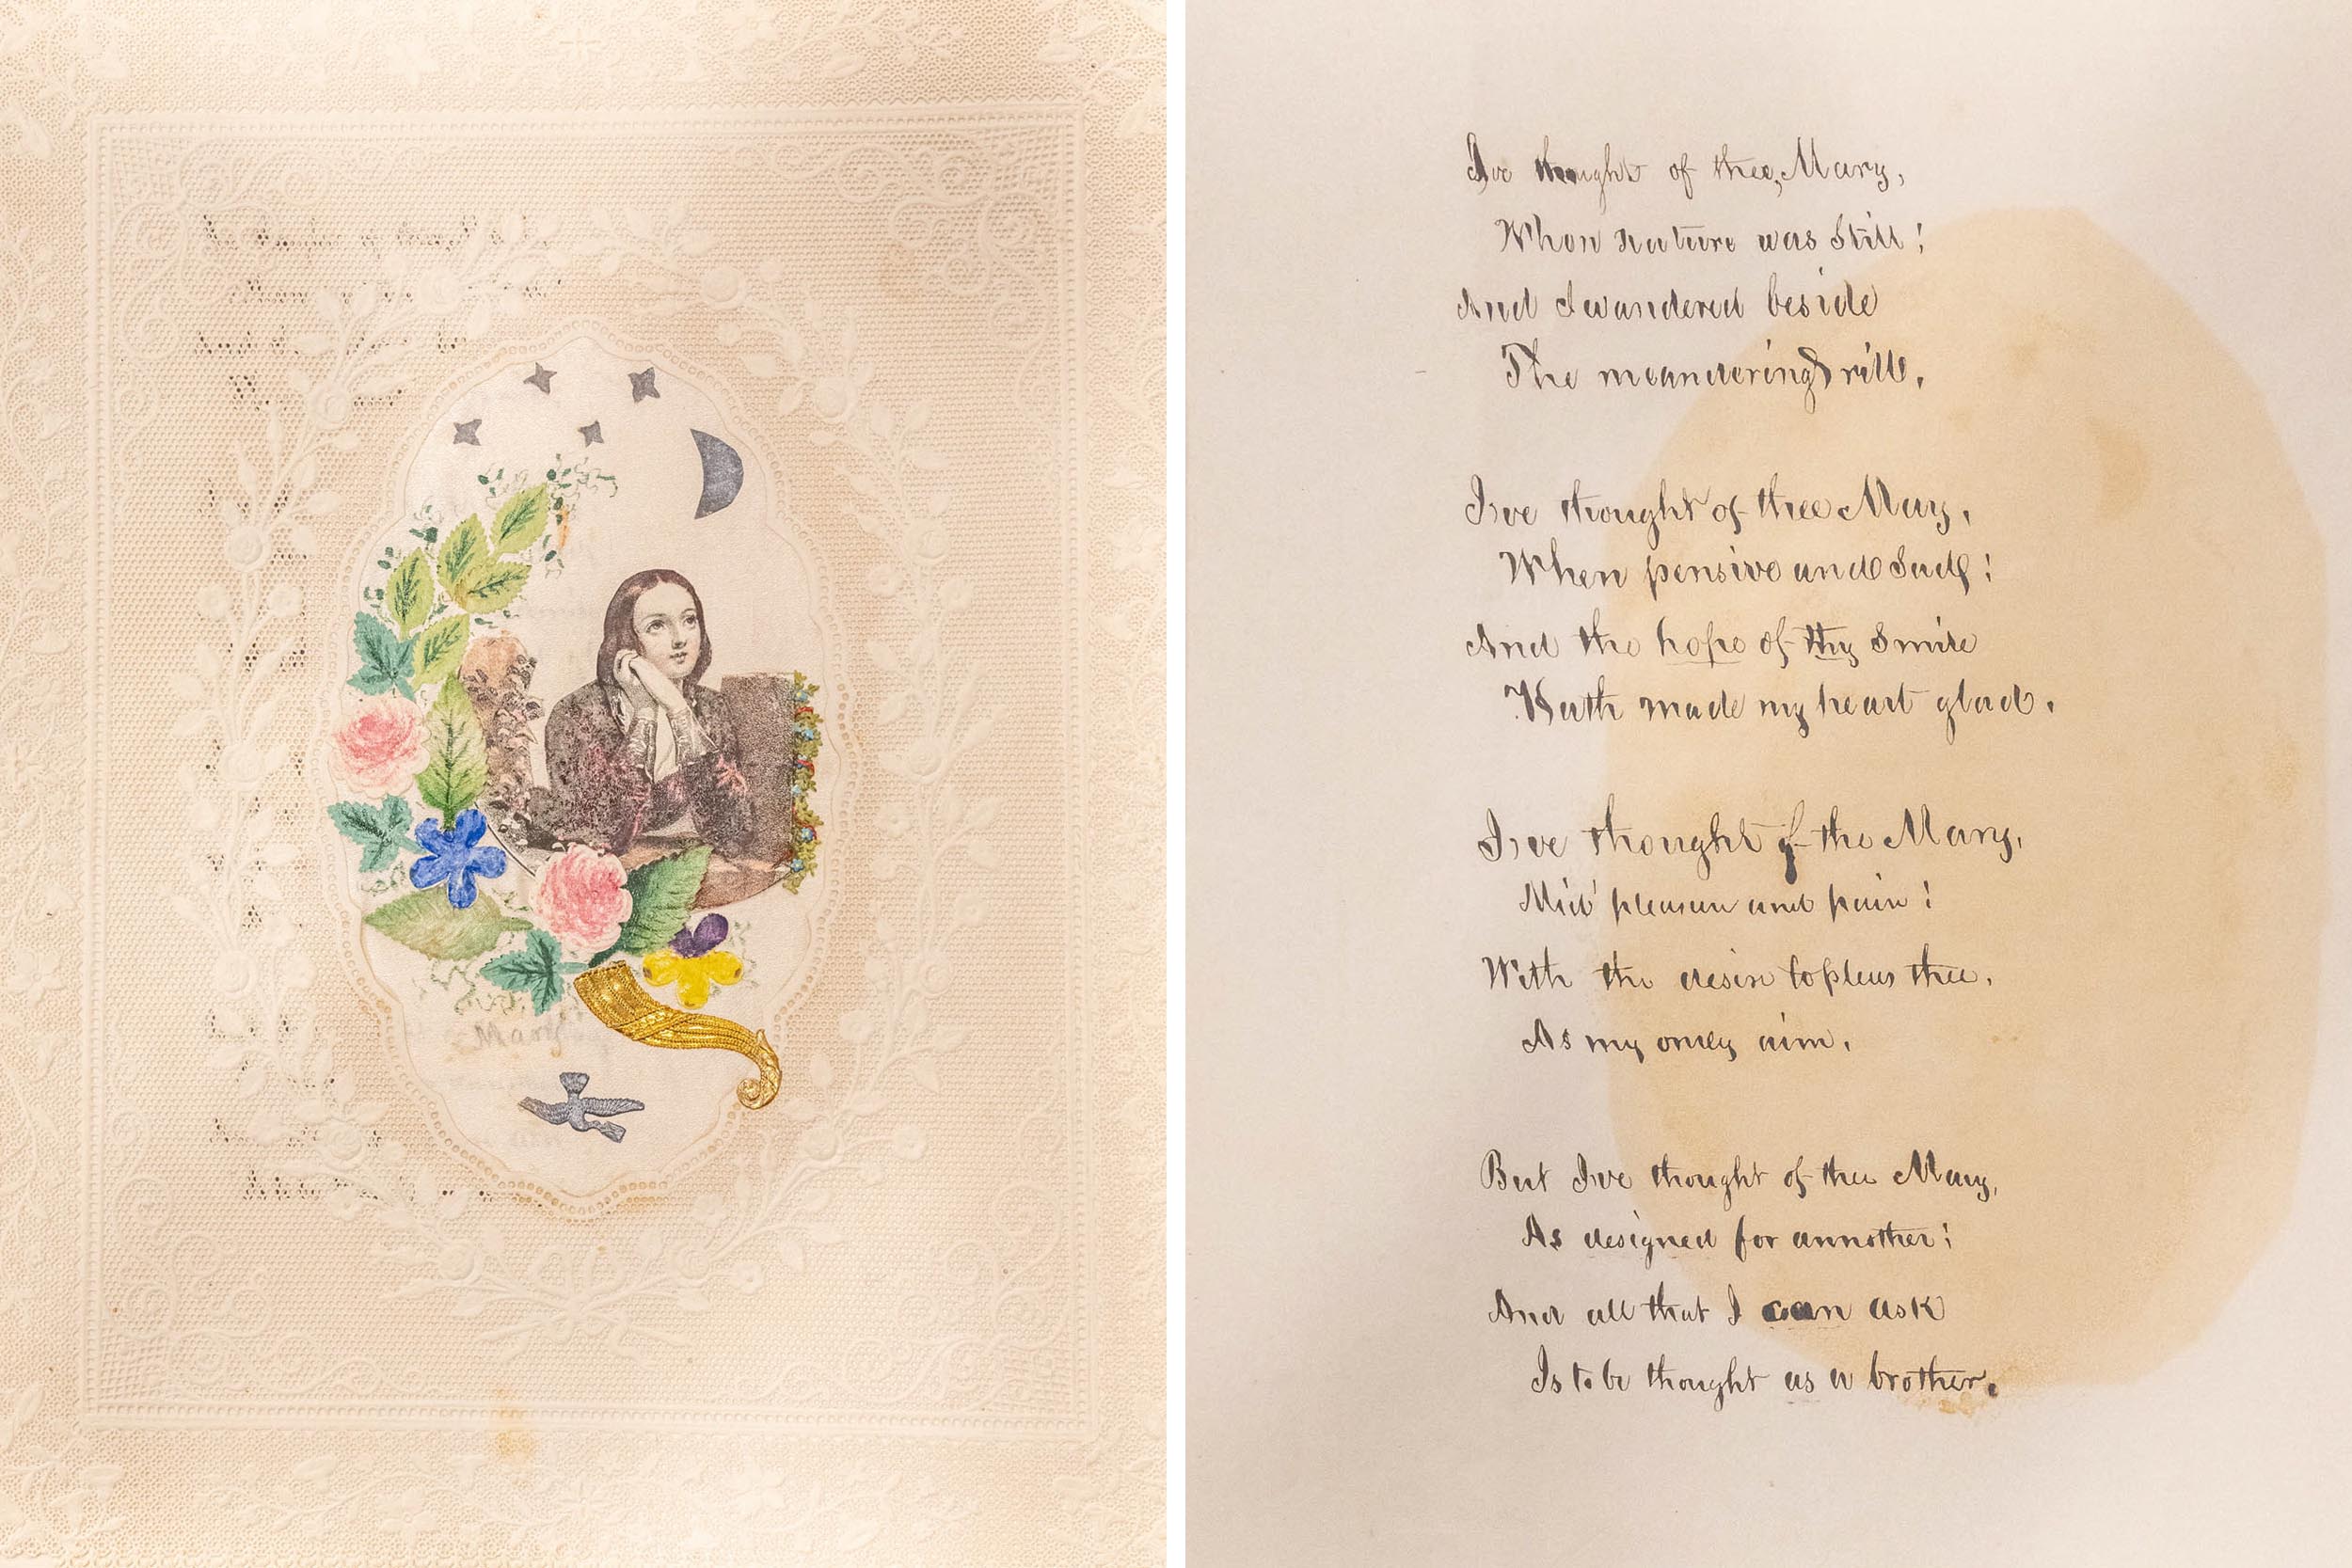 This 1844 valentine was sent to Mary Berdan by an unknown soldier. The card consists of two folded sheets with an assortment of stars, birds, flowers and lace work, as well as a hand-written poem inside.